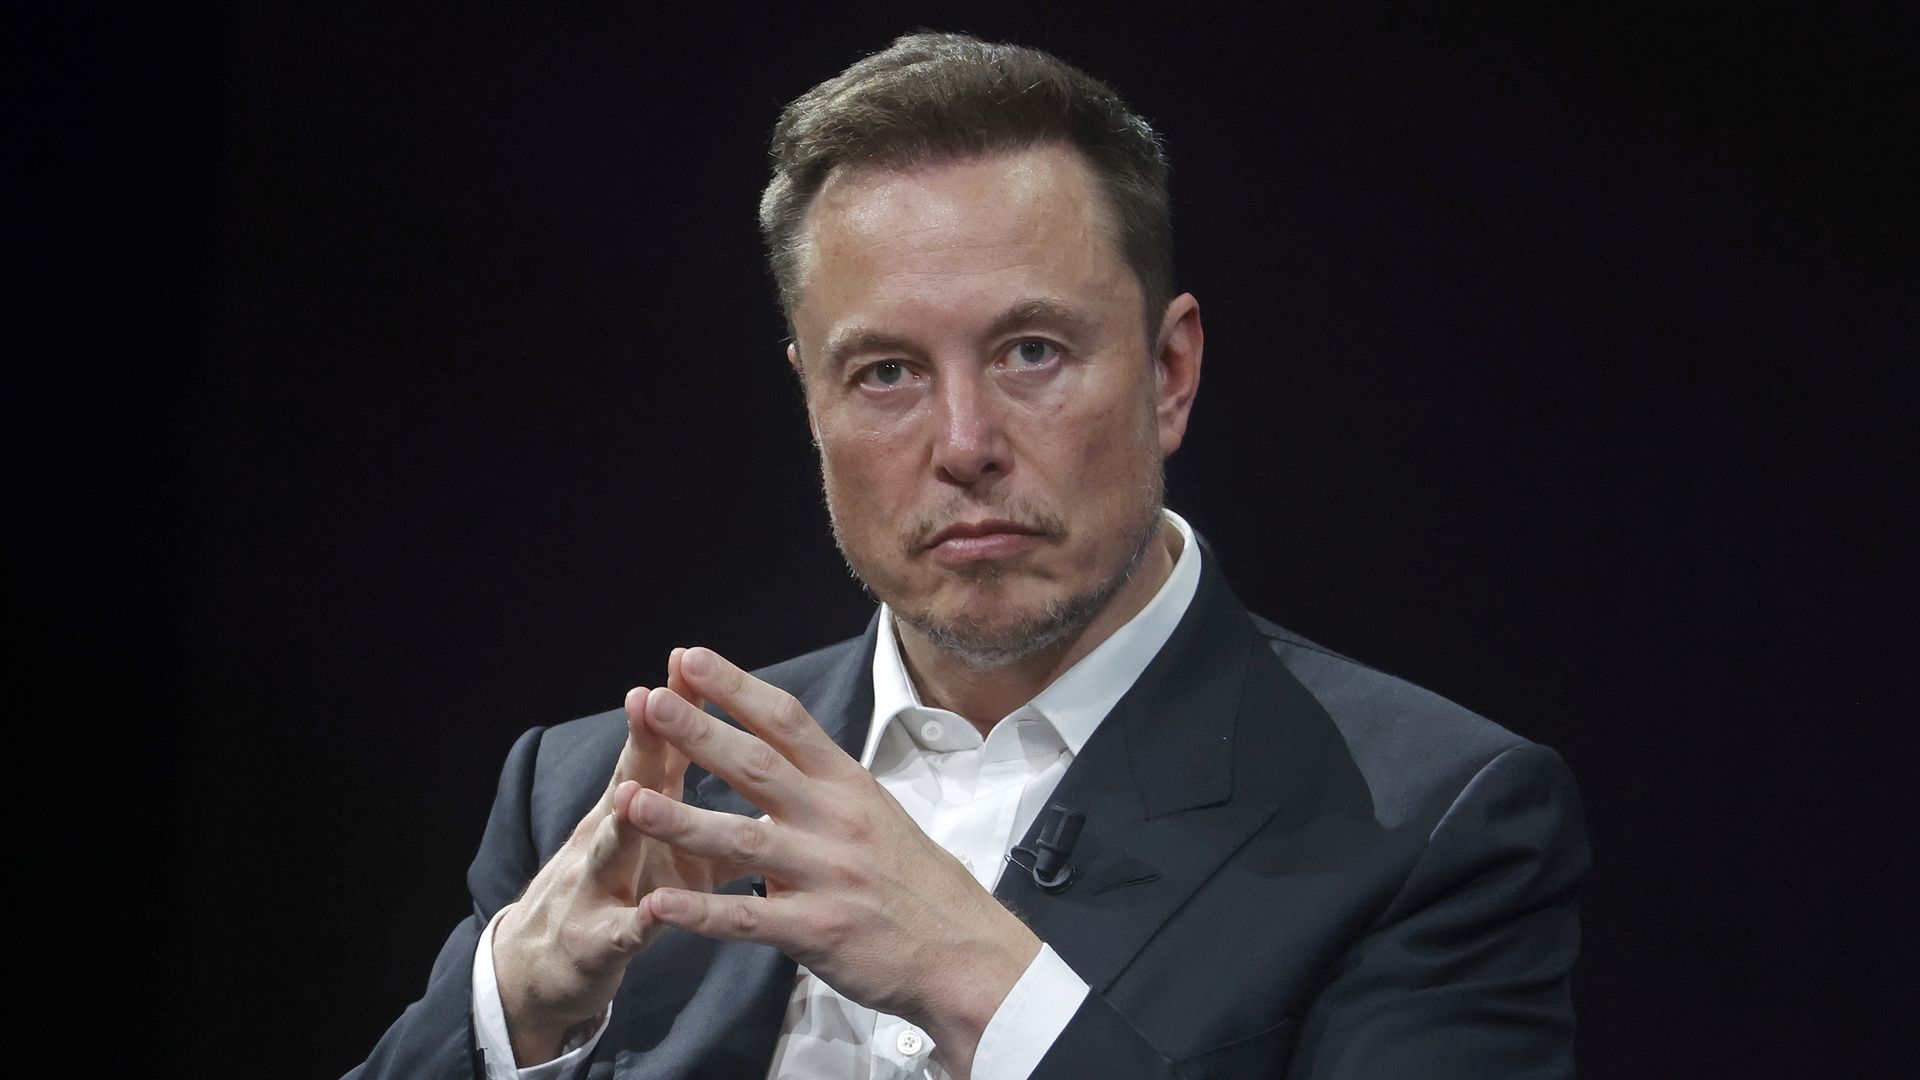  Chief Executive Officer of SpaceX and Tesla and owner of Twitter, Elon Musk attends the Viva Technology conference dedicated to innovation and startups at the Porte de Versailles exhibition centre on June 16, 2023 in Paris, France. 